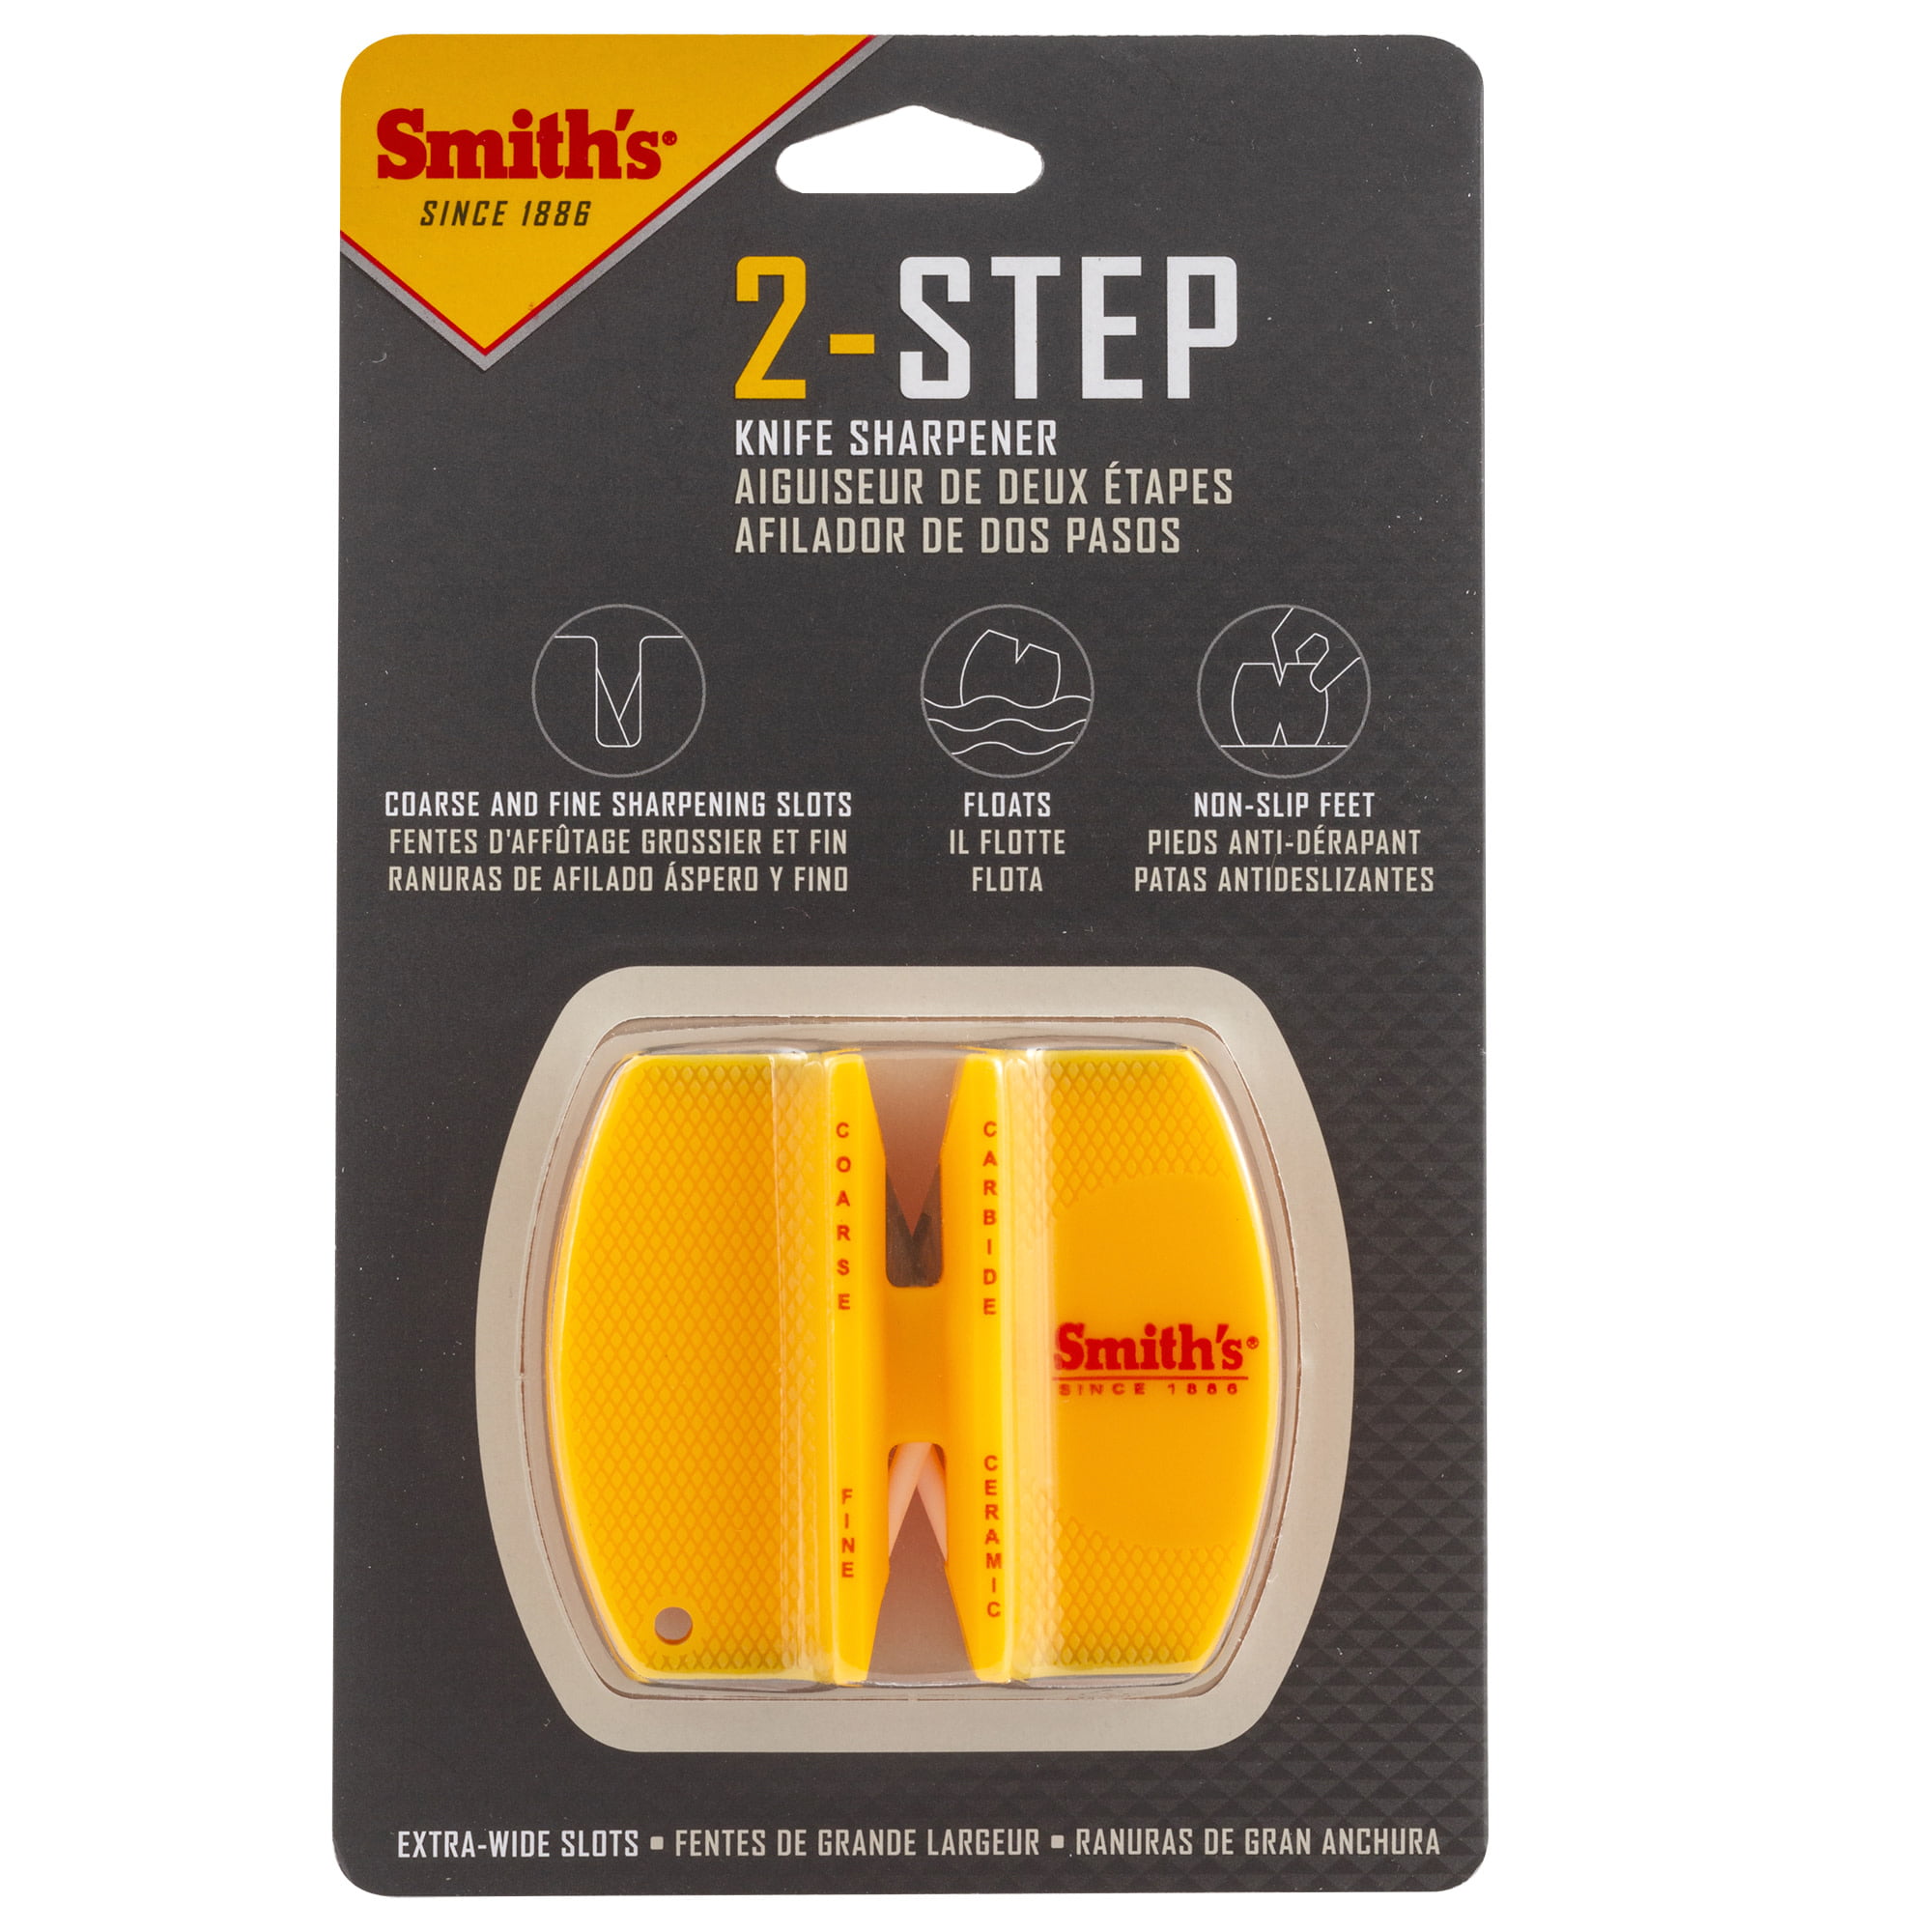 Smith's 2-Step Knife Sharpener - Pecos, TX - Gibson's Hardware and